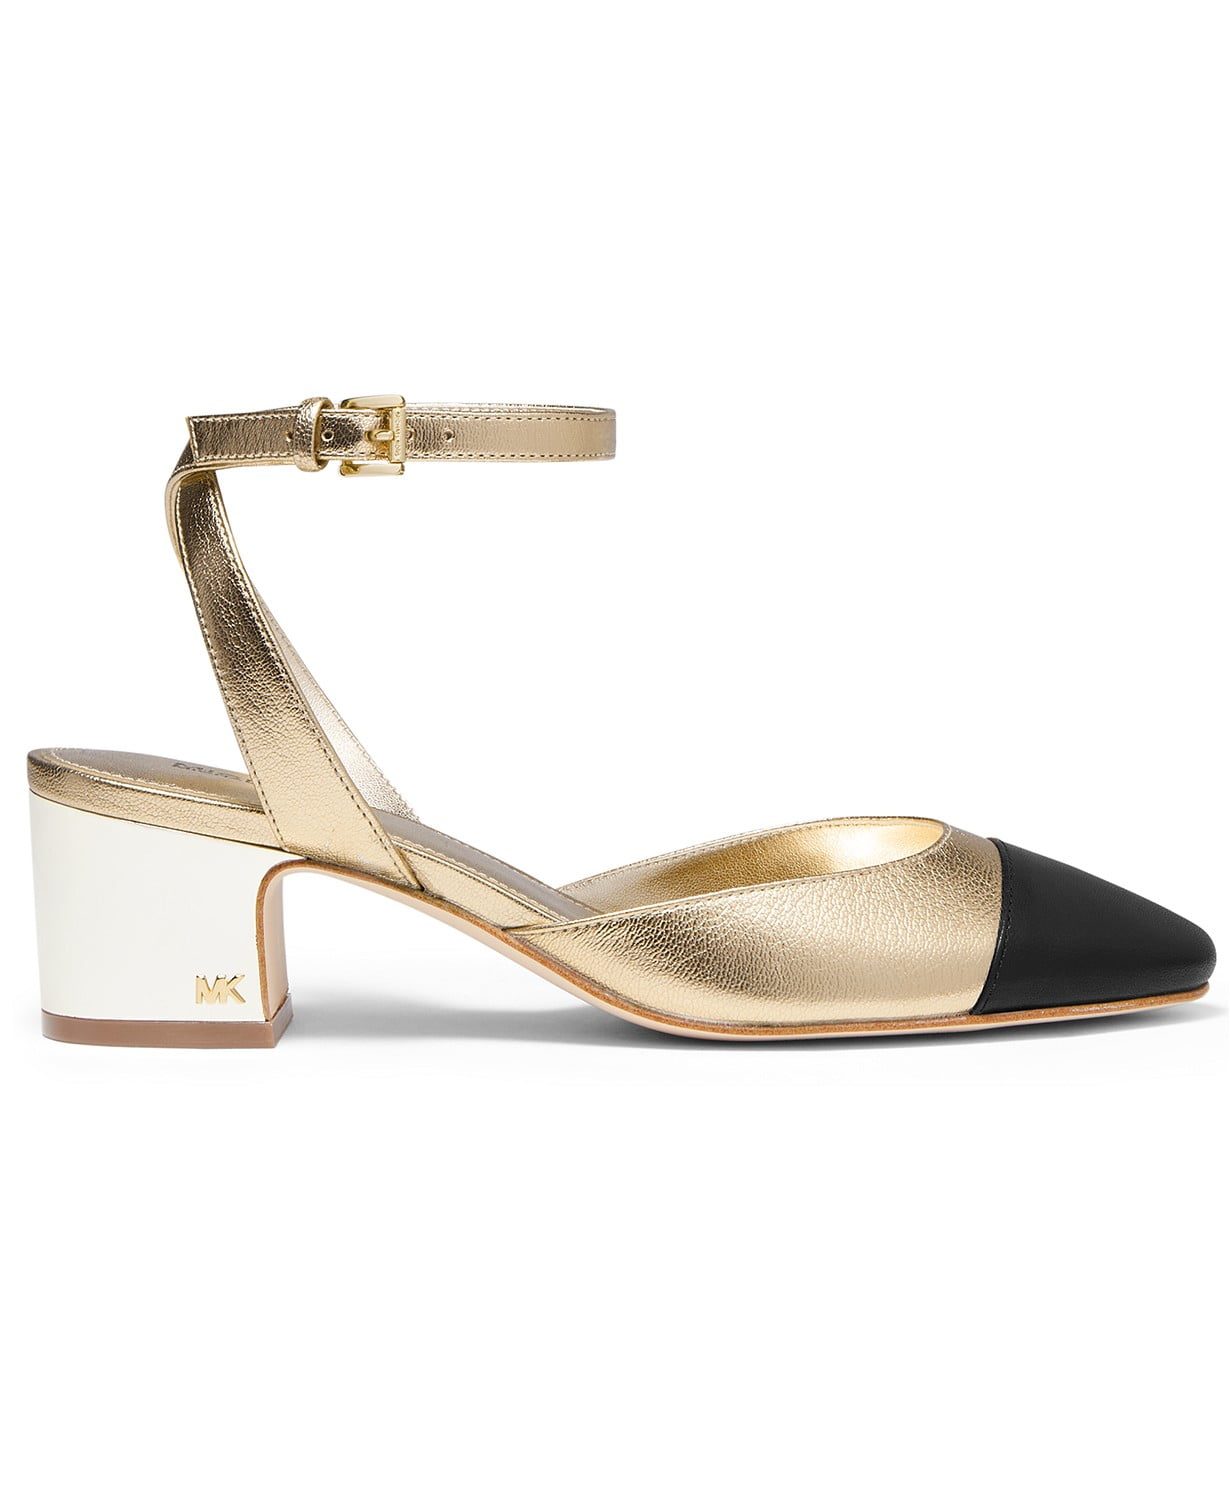 www.couturepoint.com-michael-michael-kors-womens-gold-leather-brie-ankle-strap-pumps